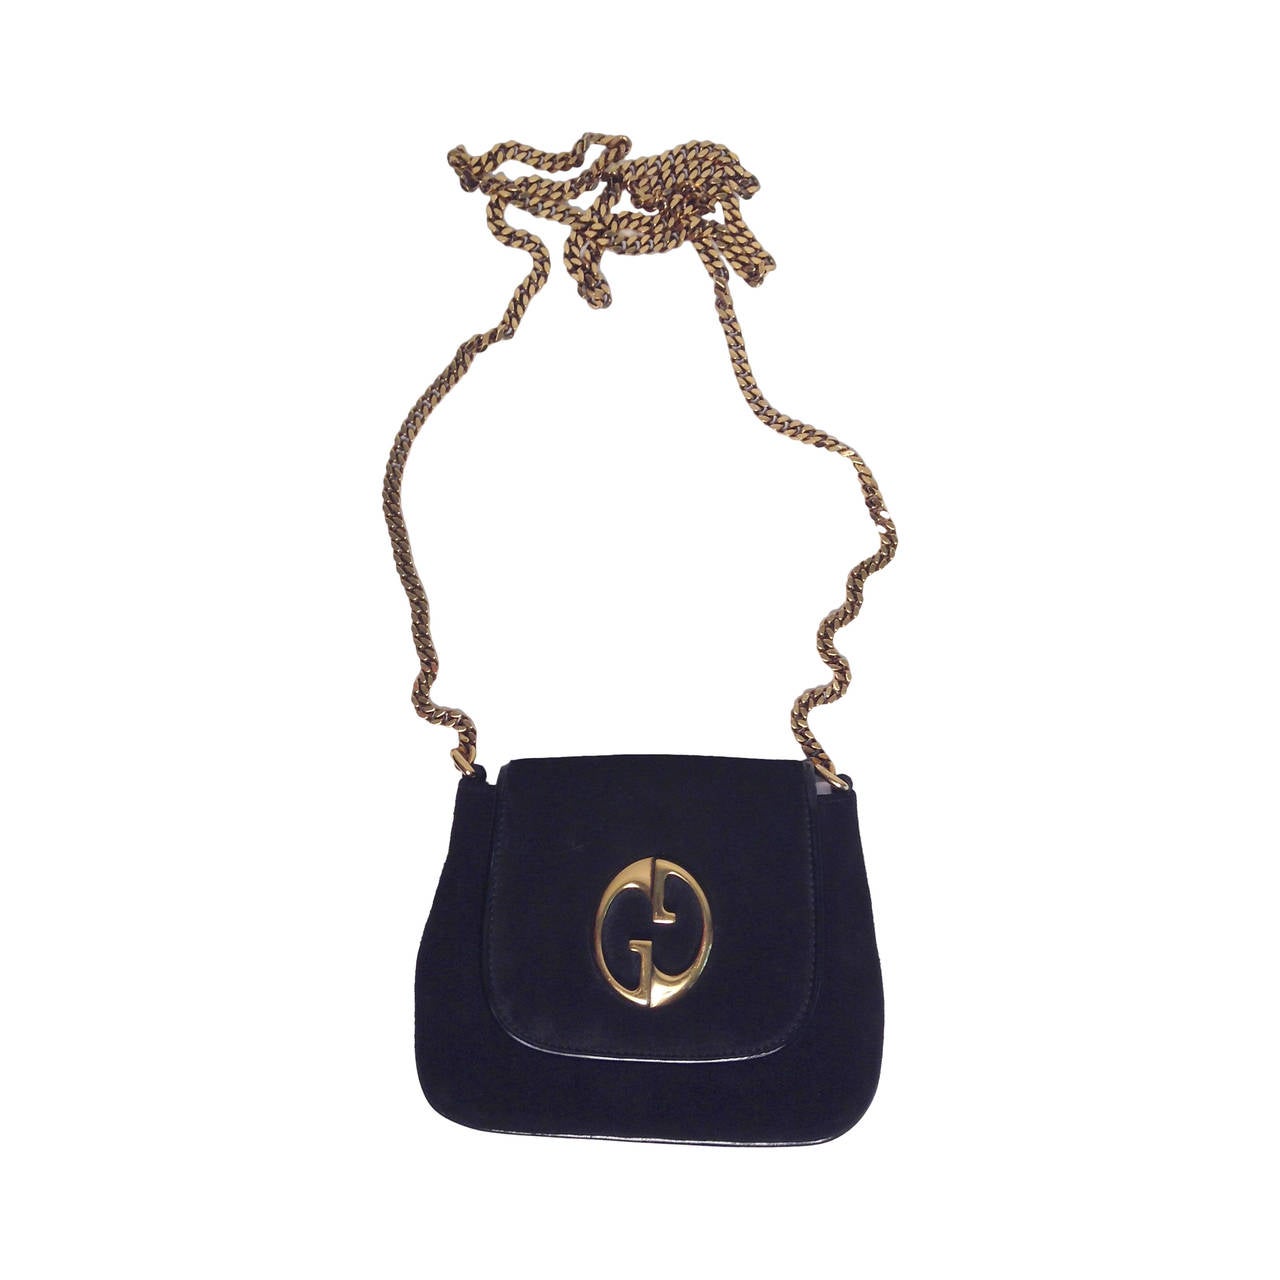 Gucci Black Suede Gold Chain Bag 1973 Reissue